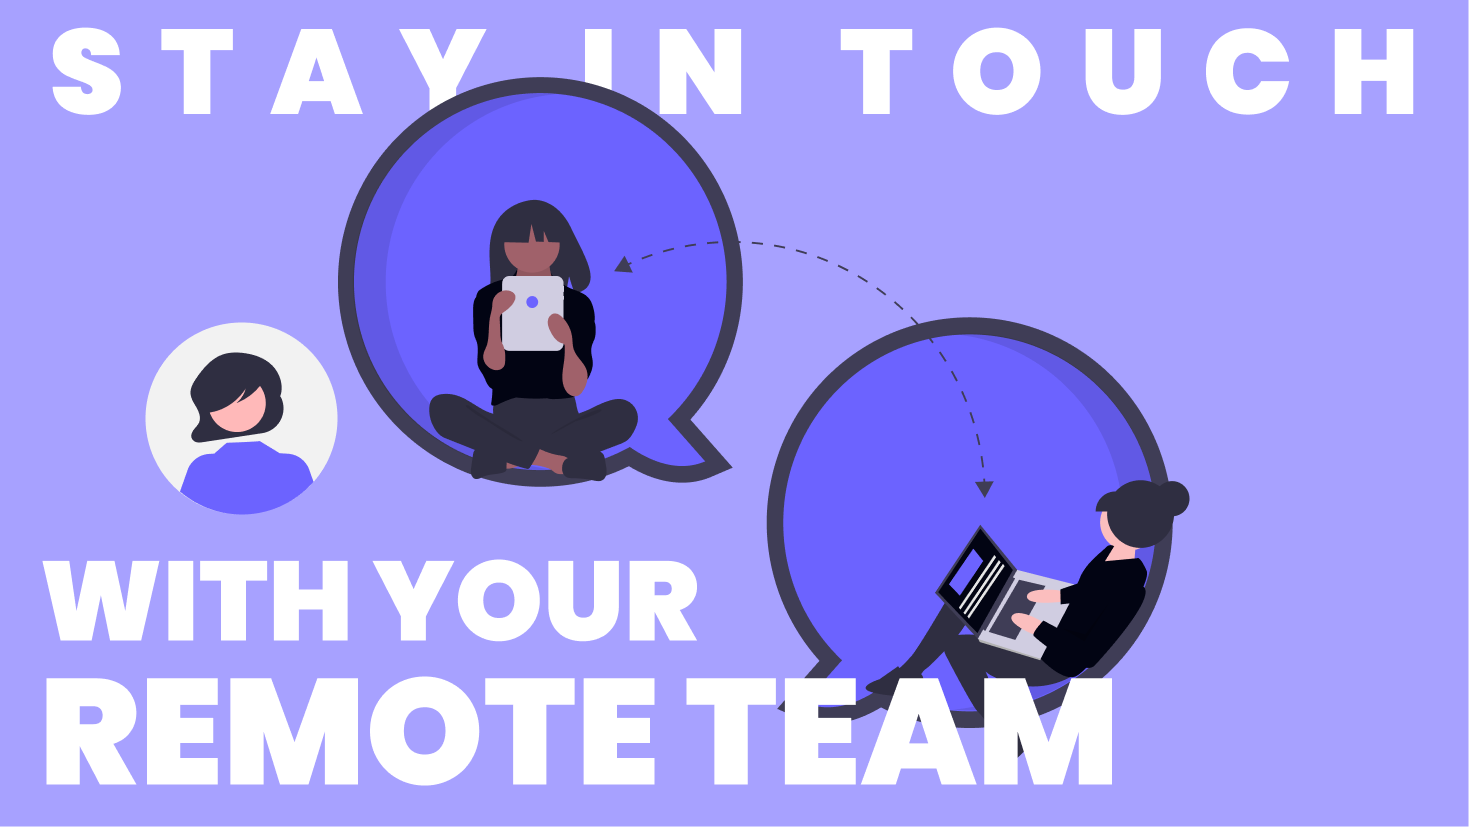 Remote work, how to stay in touch with your team?